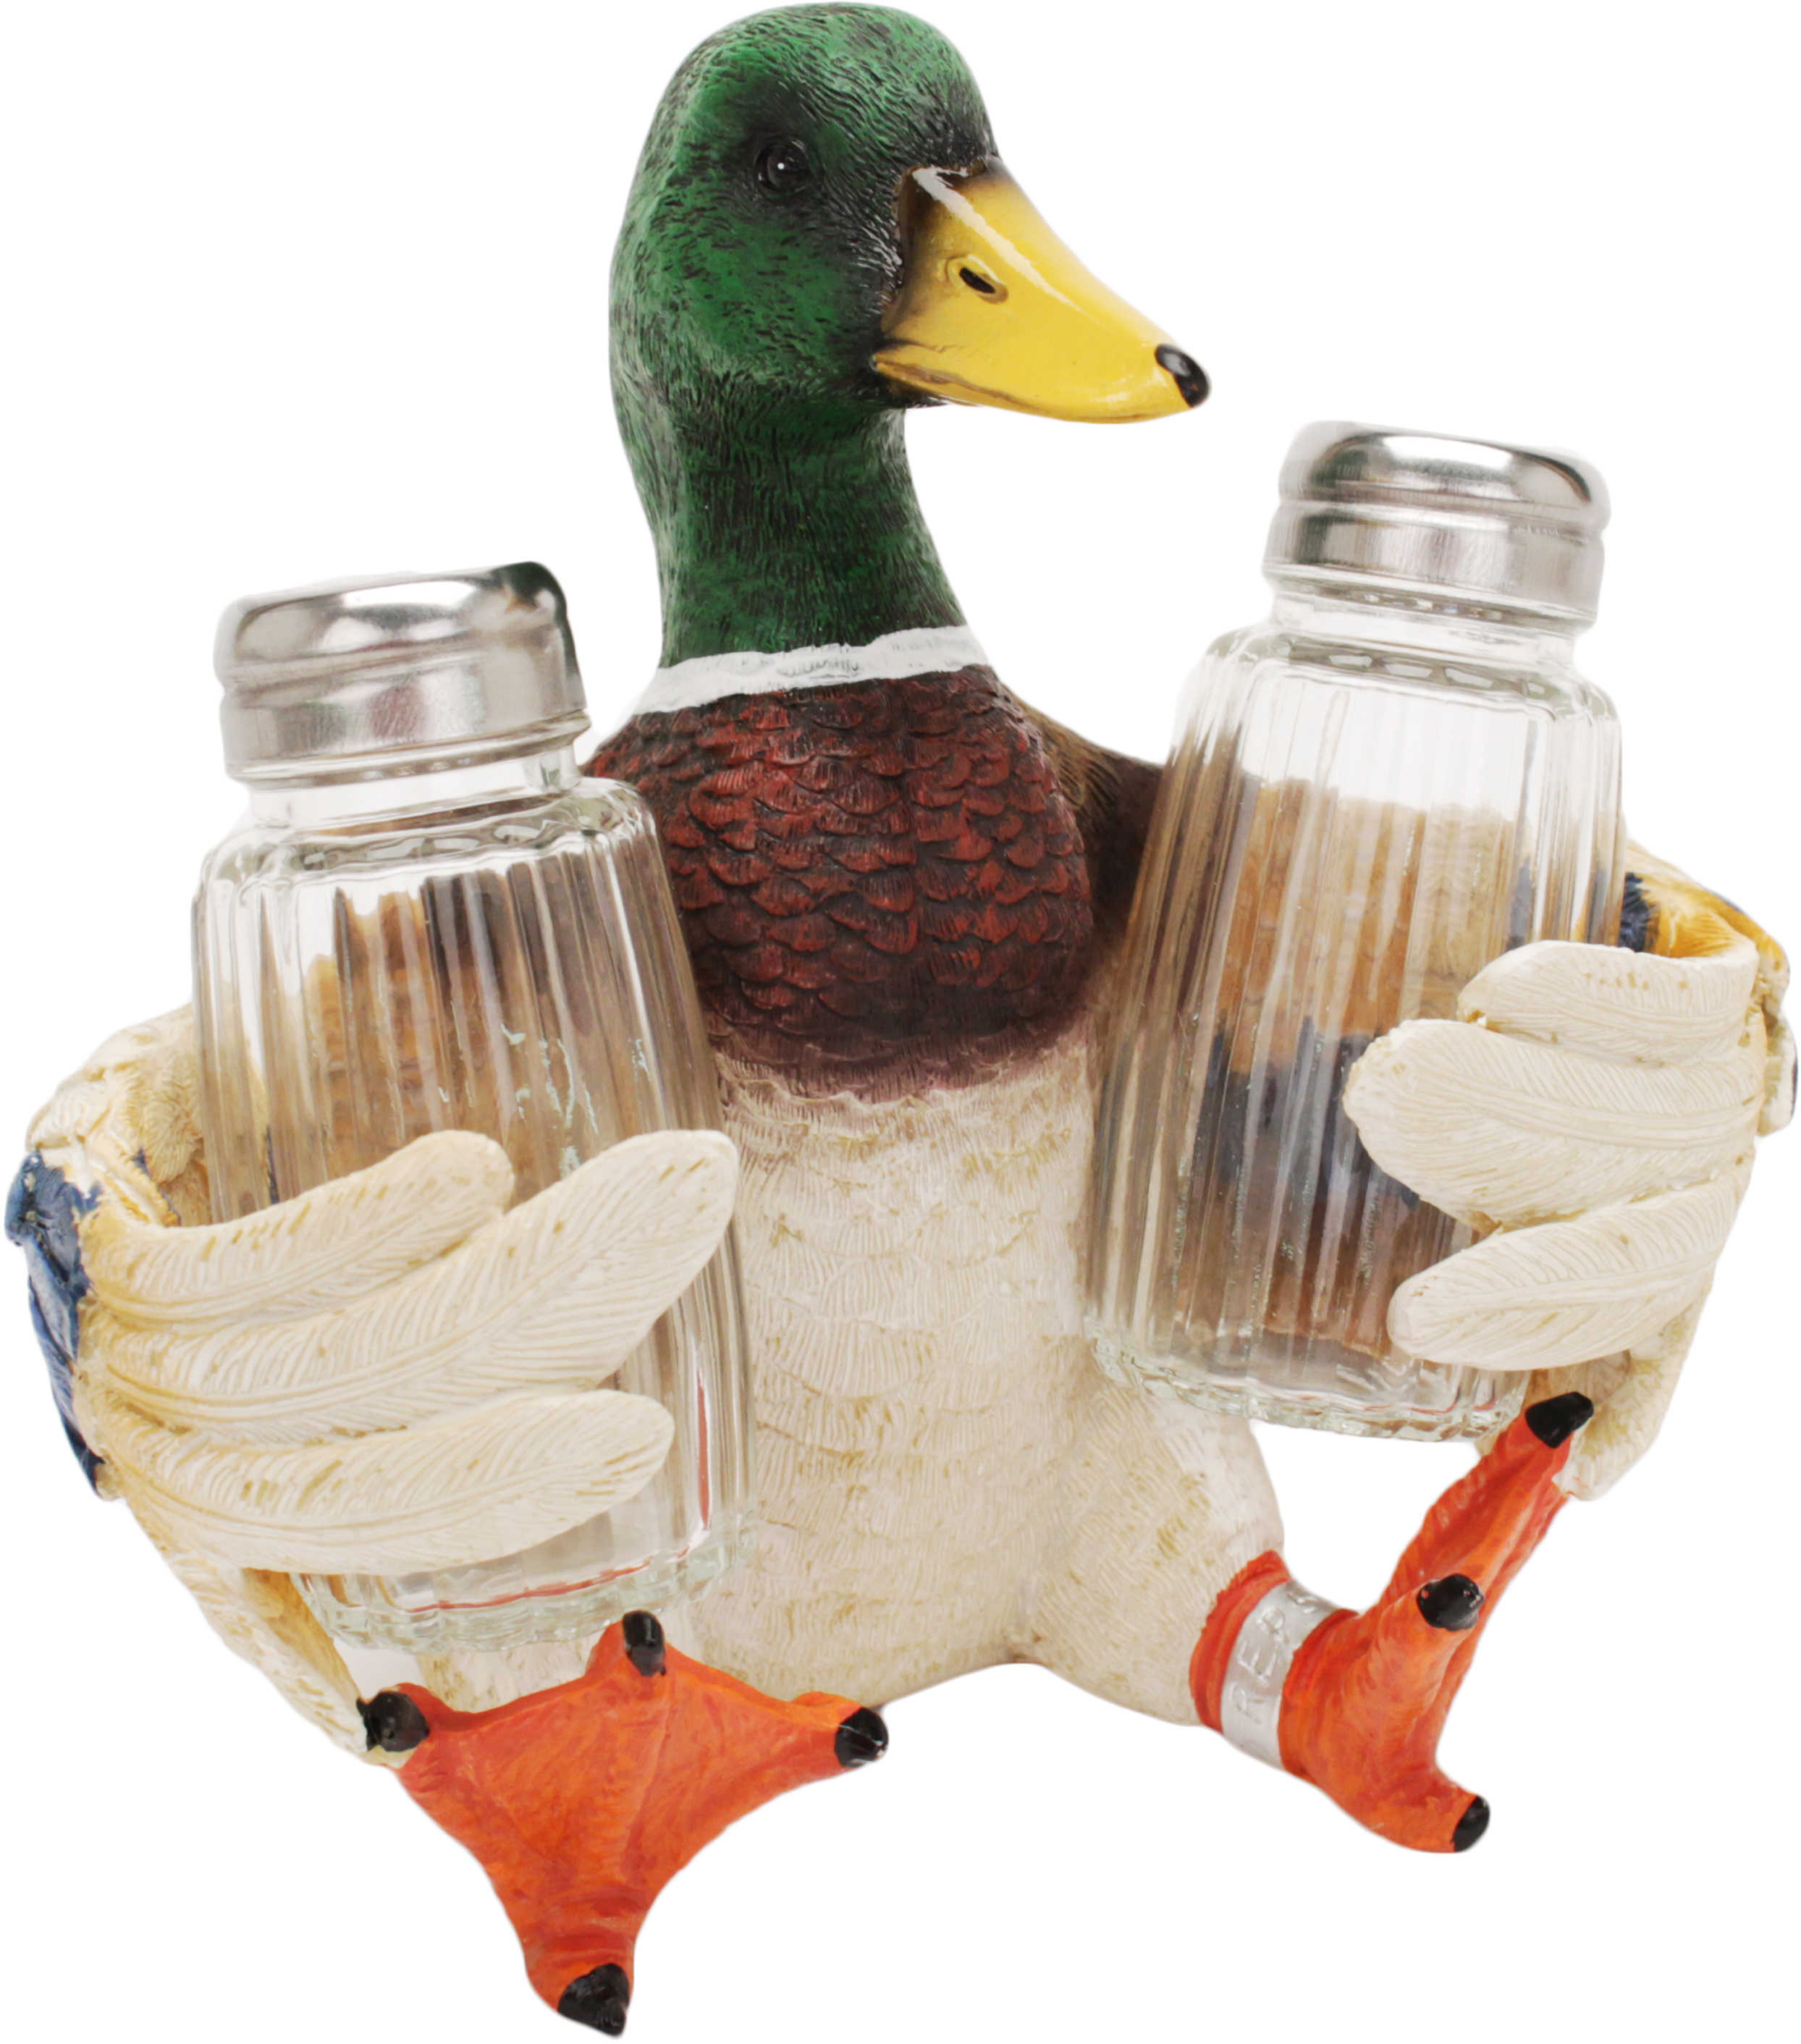 Rivers Edge Products Salt and Pepper Shaker Duck 577